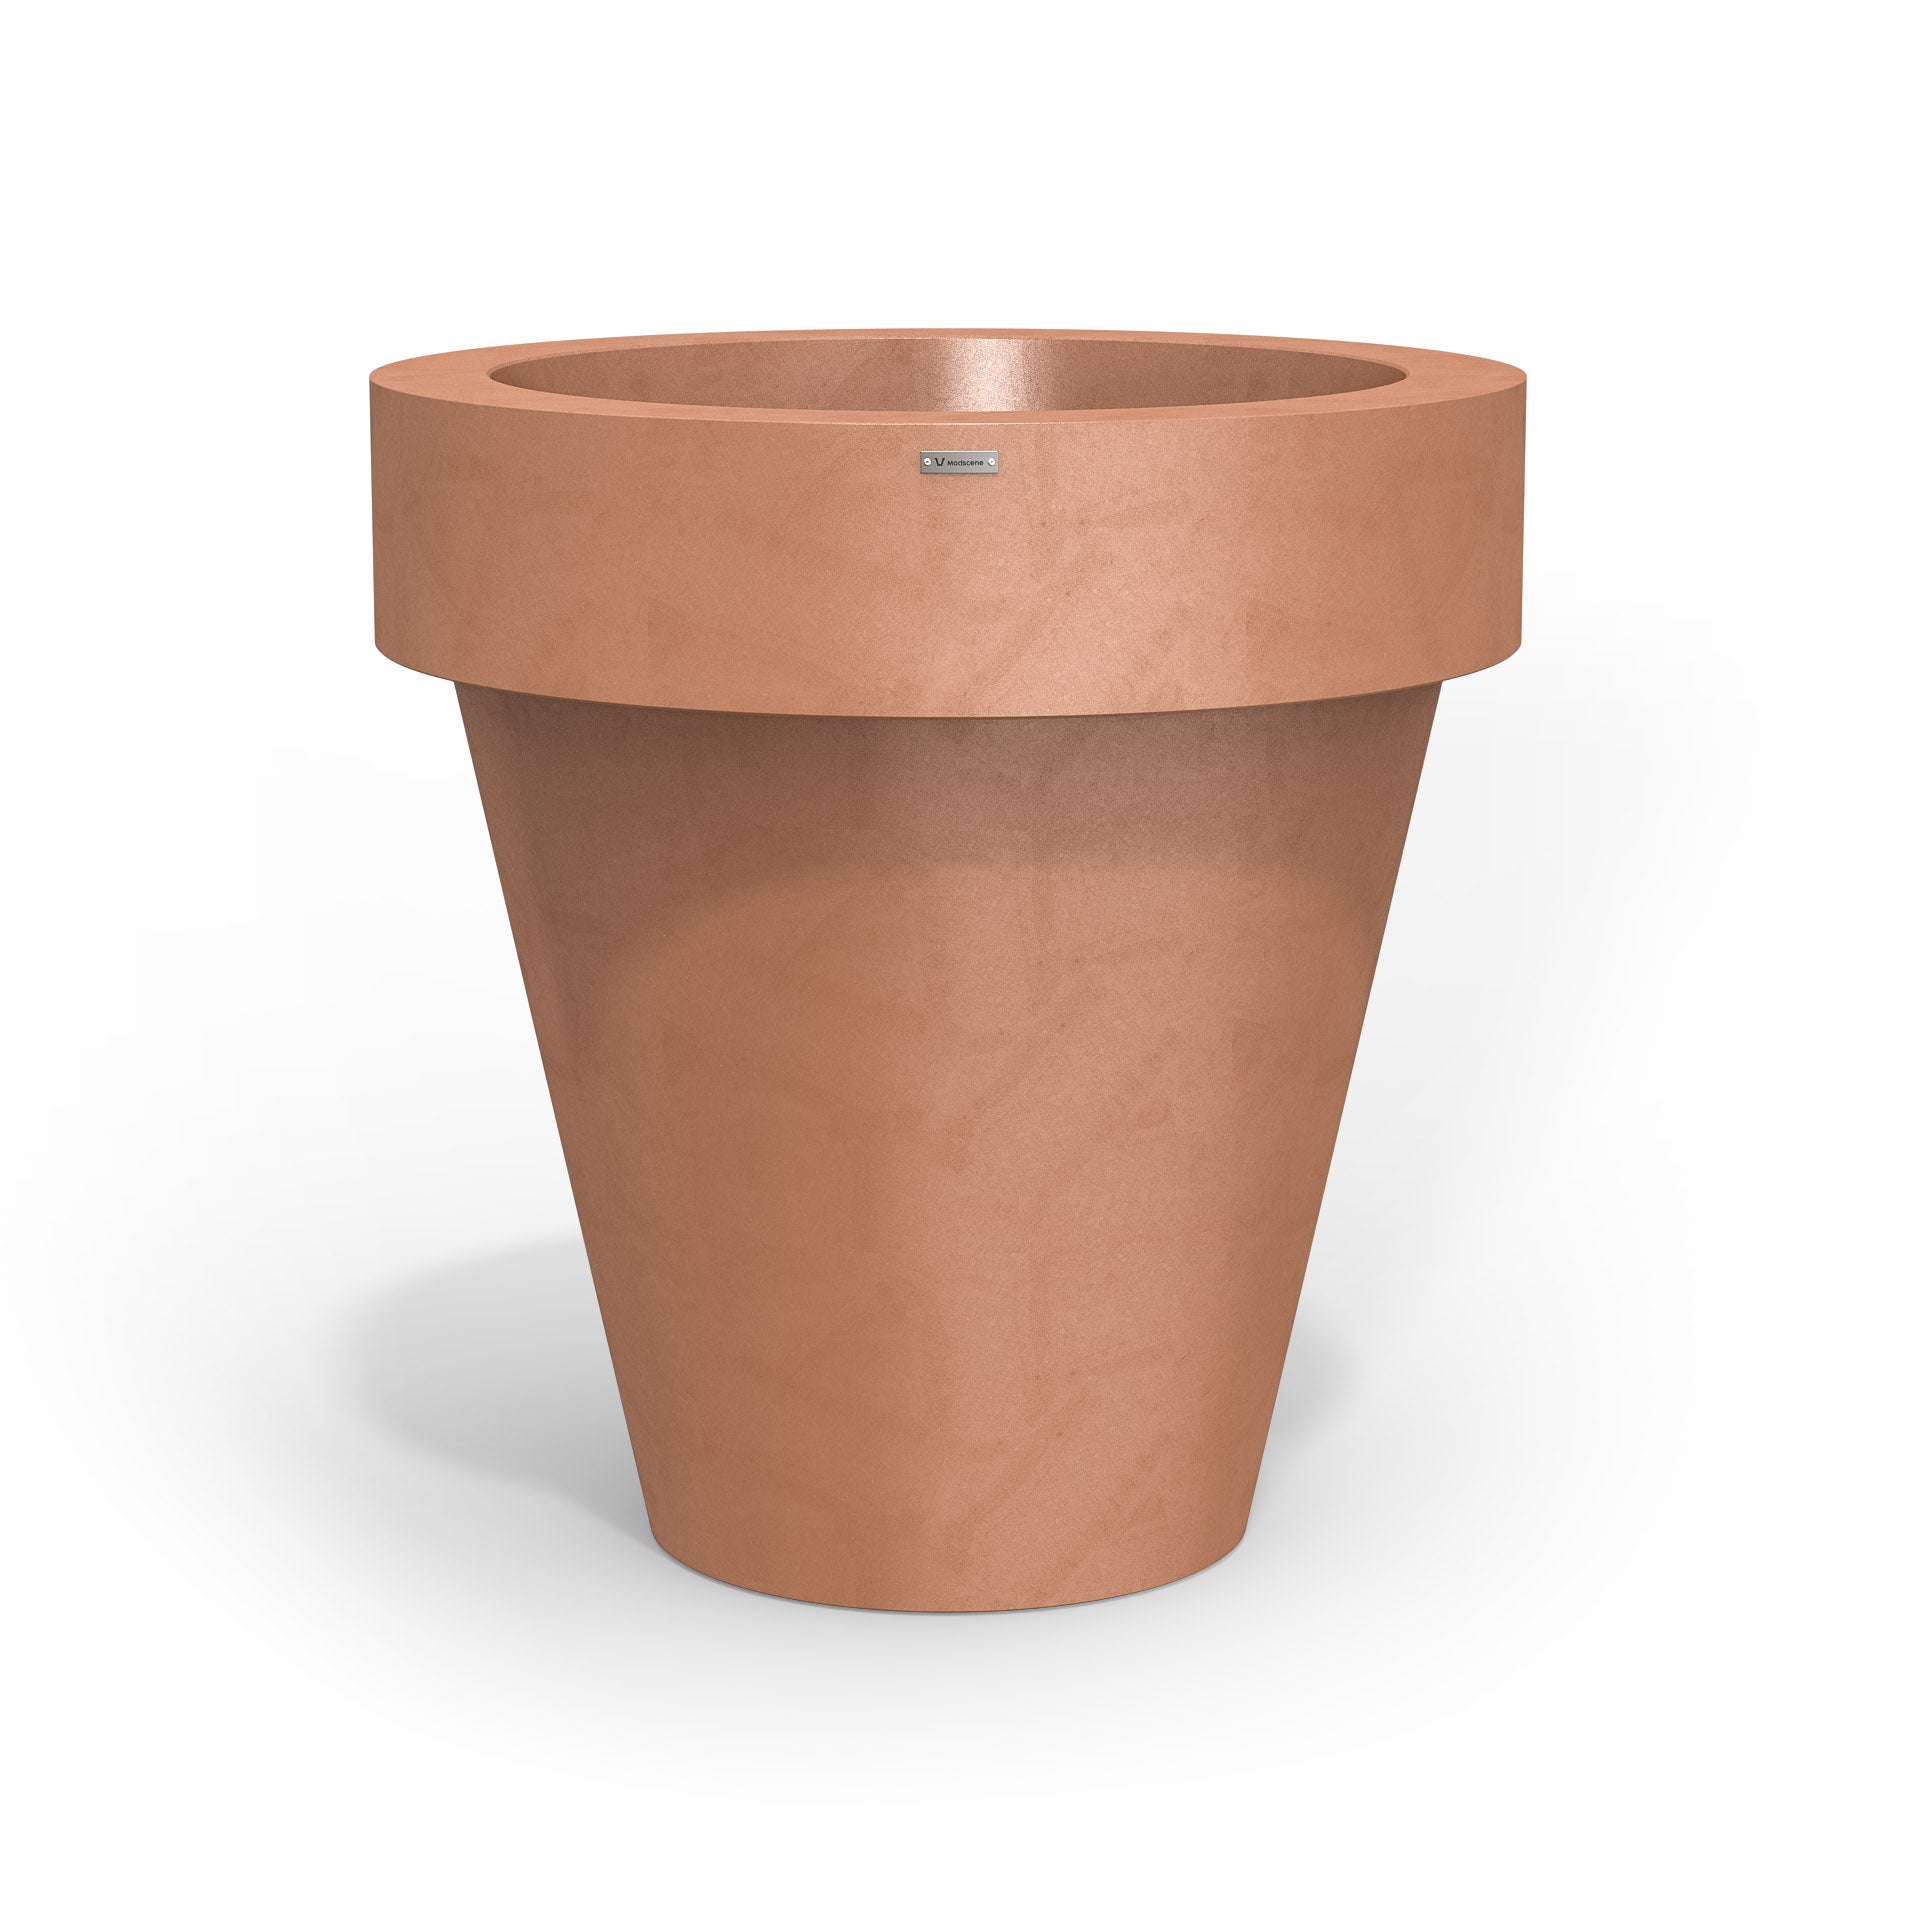 Extra large Modscene planter pot in a rustic terracotta colour.